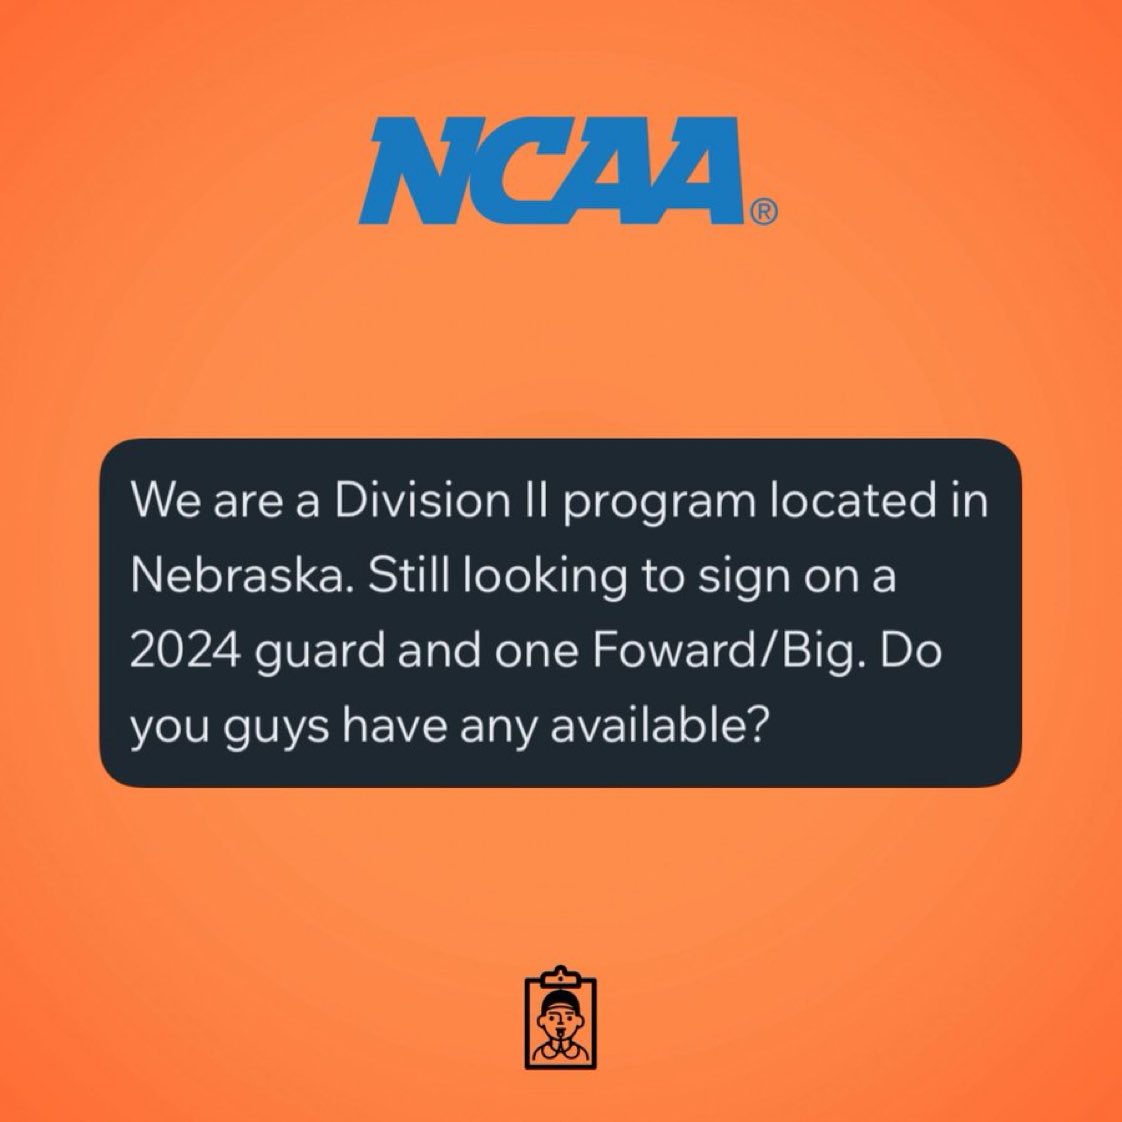 🚨 Division II Basketball Program looking for available prospects! (Scholarships available) 🏀 

All Positions... Who fits the bill ⁉️ 🤔

Reach 𝙀𝙑𝙀𝙍𝙔 program: buff.ly/3r4ysgl

⬇️ DROP INFO ⬇️